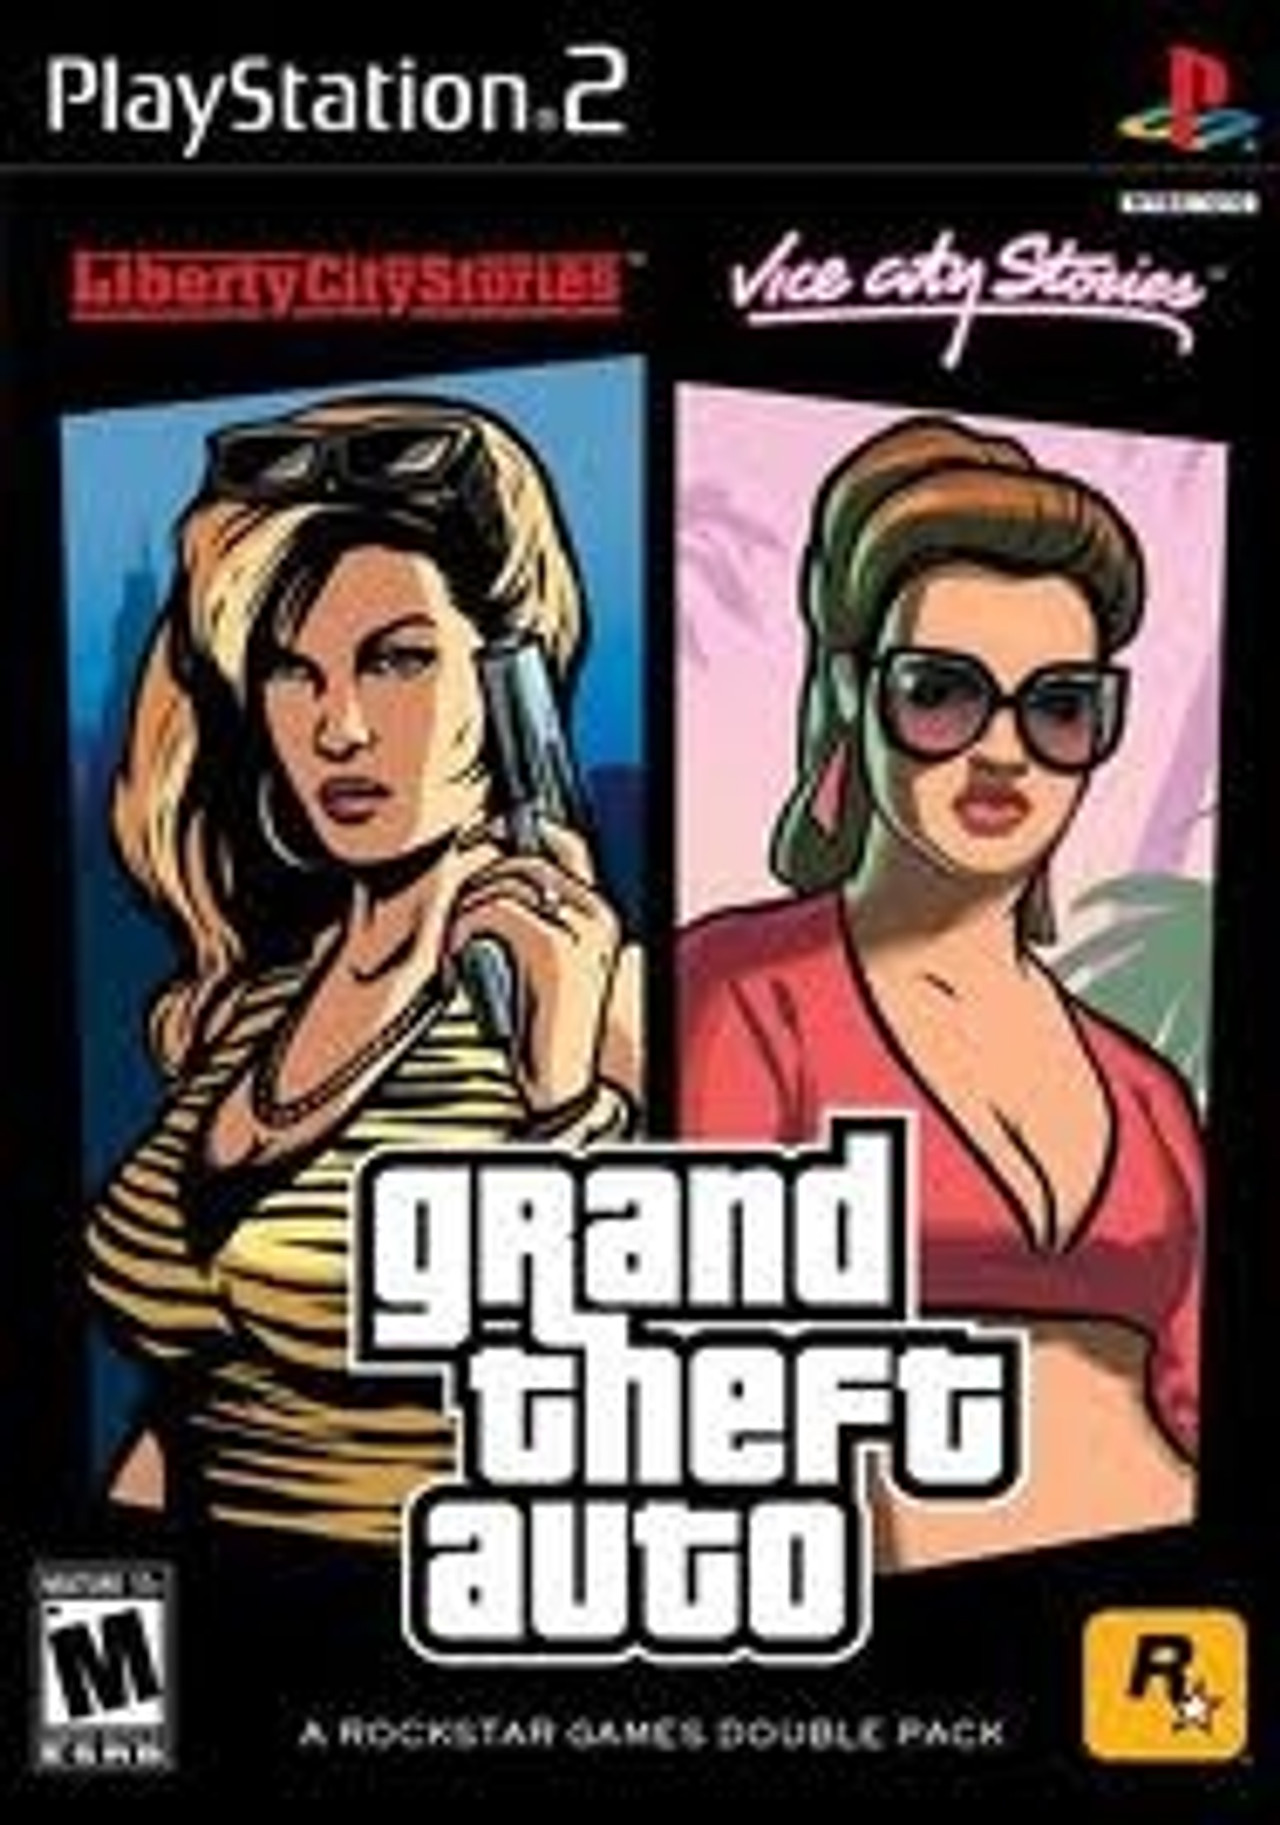 gta-double-pack-liberty-city-vice-city-stories-ps2-game-for-sale-dkoldies